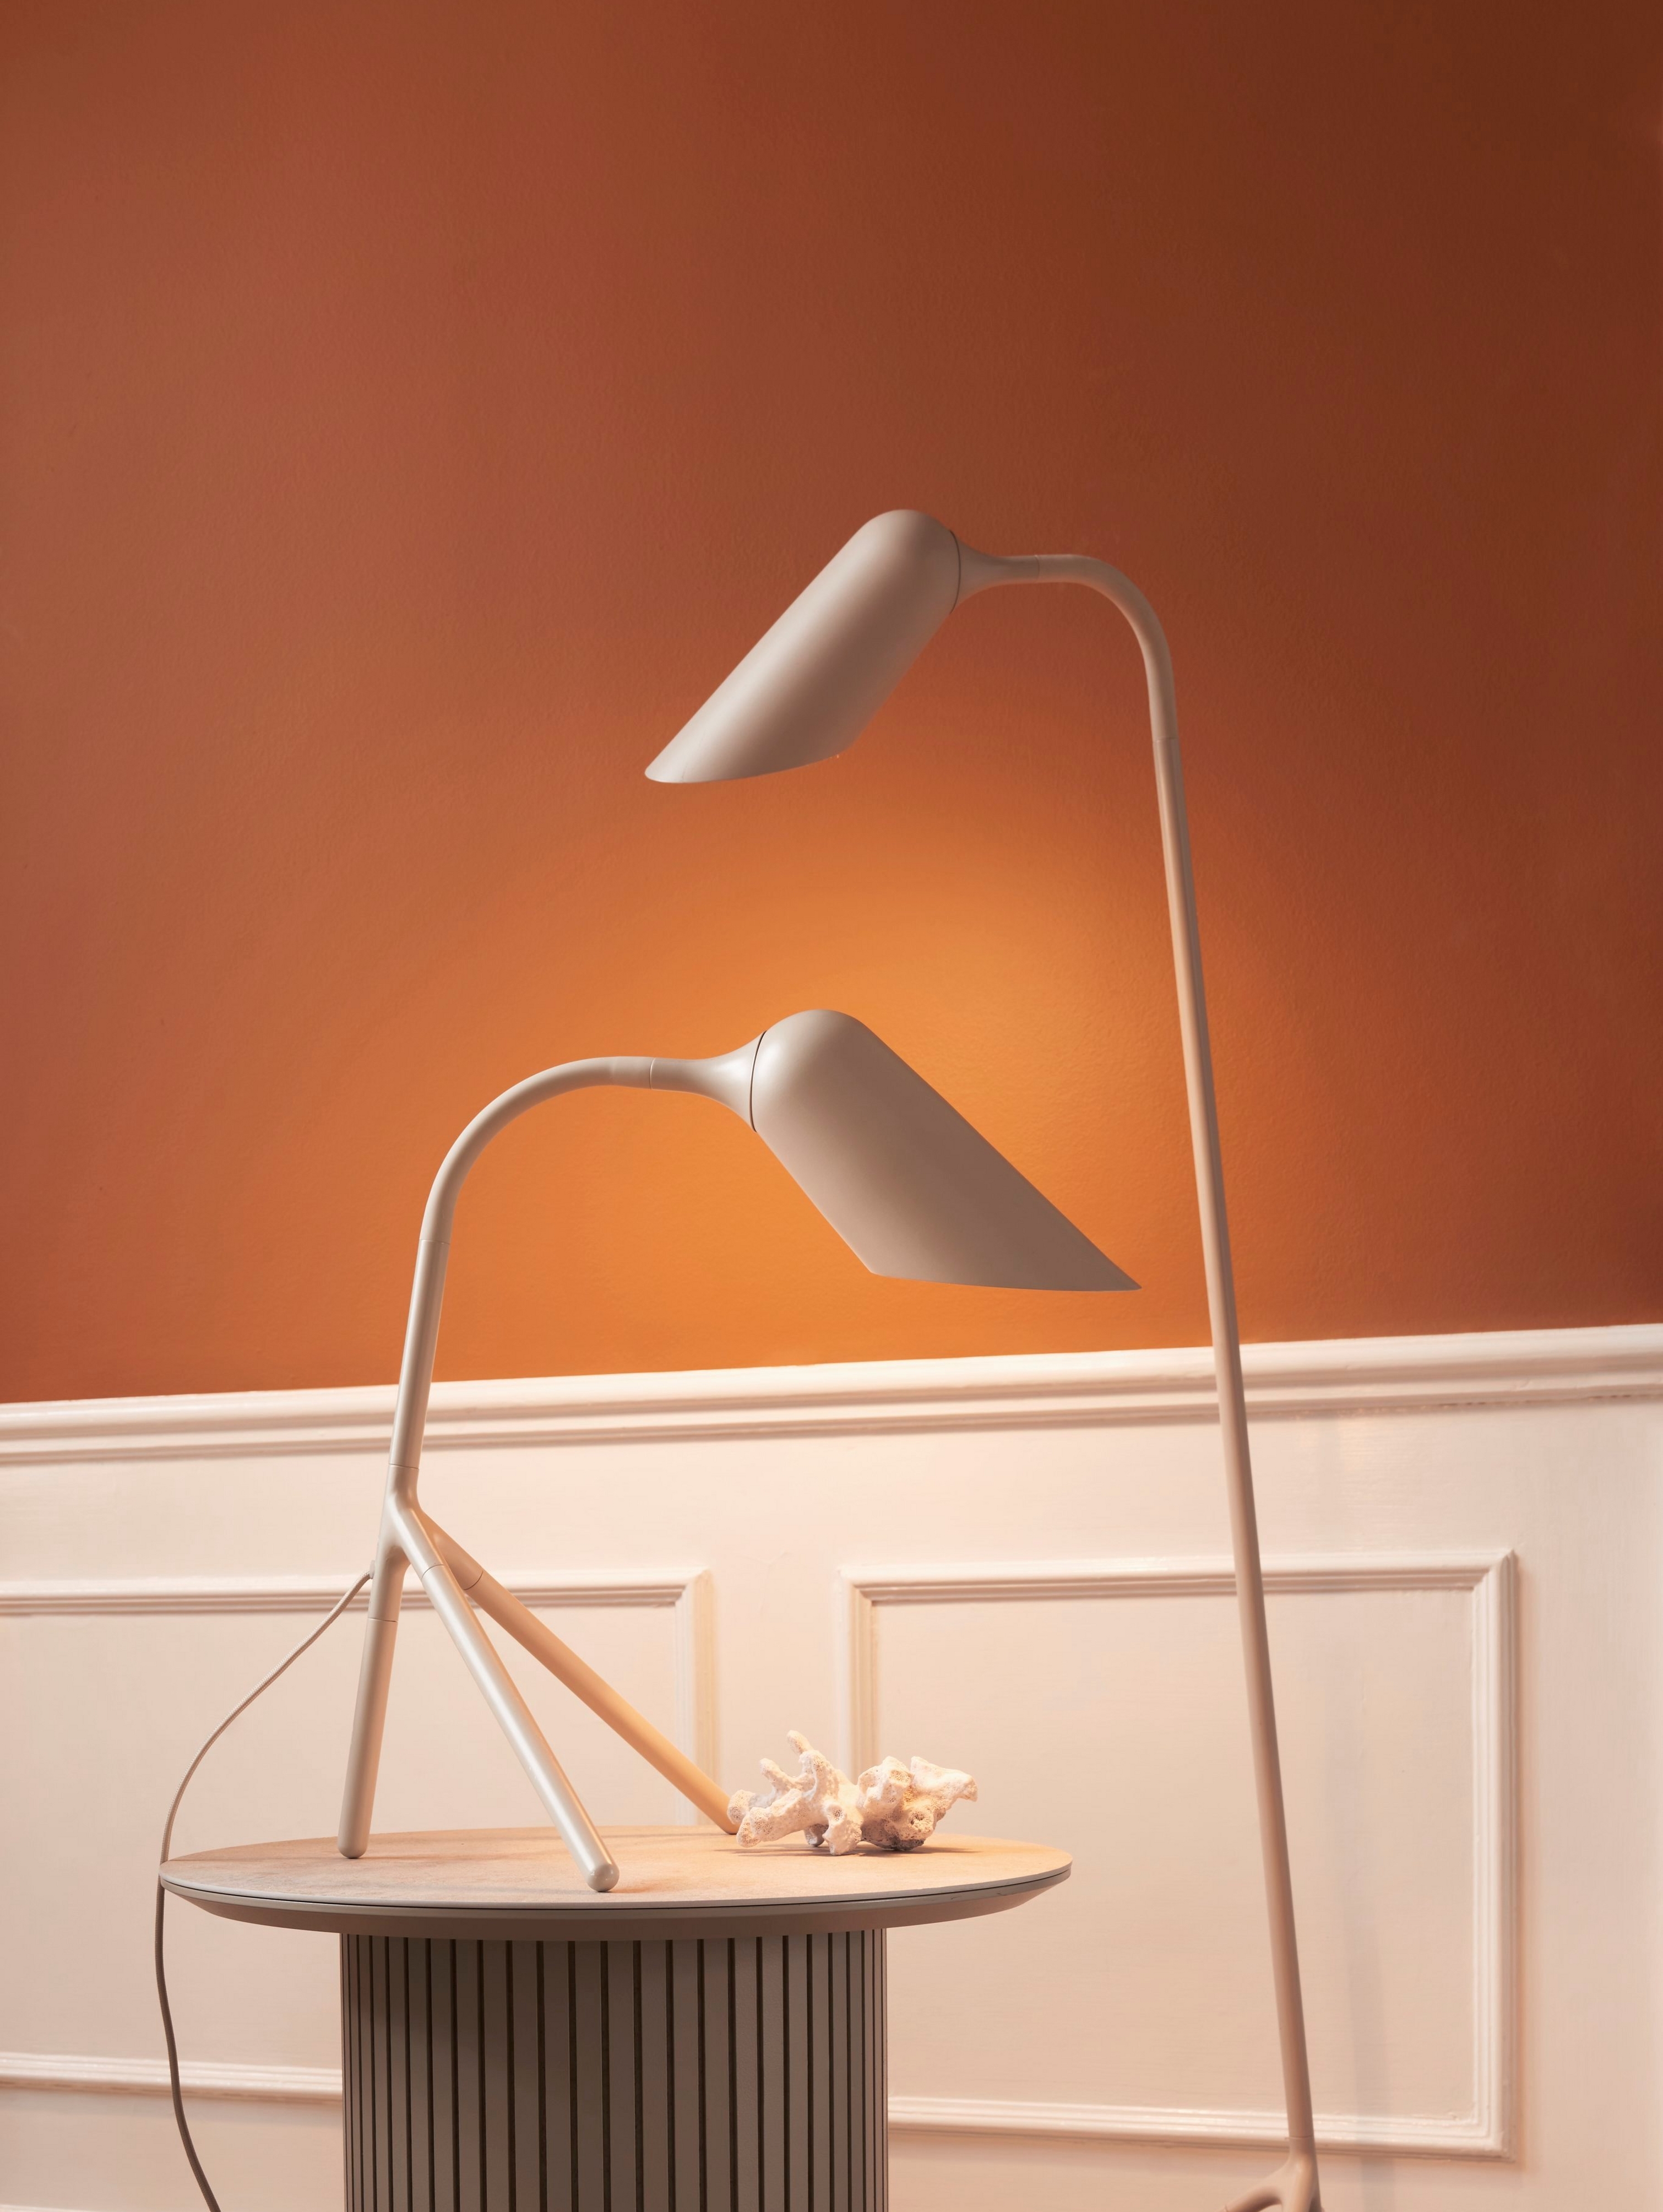 Arrangement of the Curious table lamp and the Curious floor lamp.